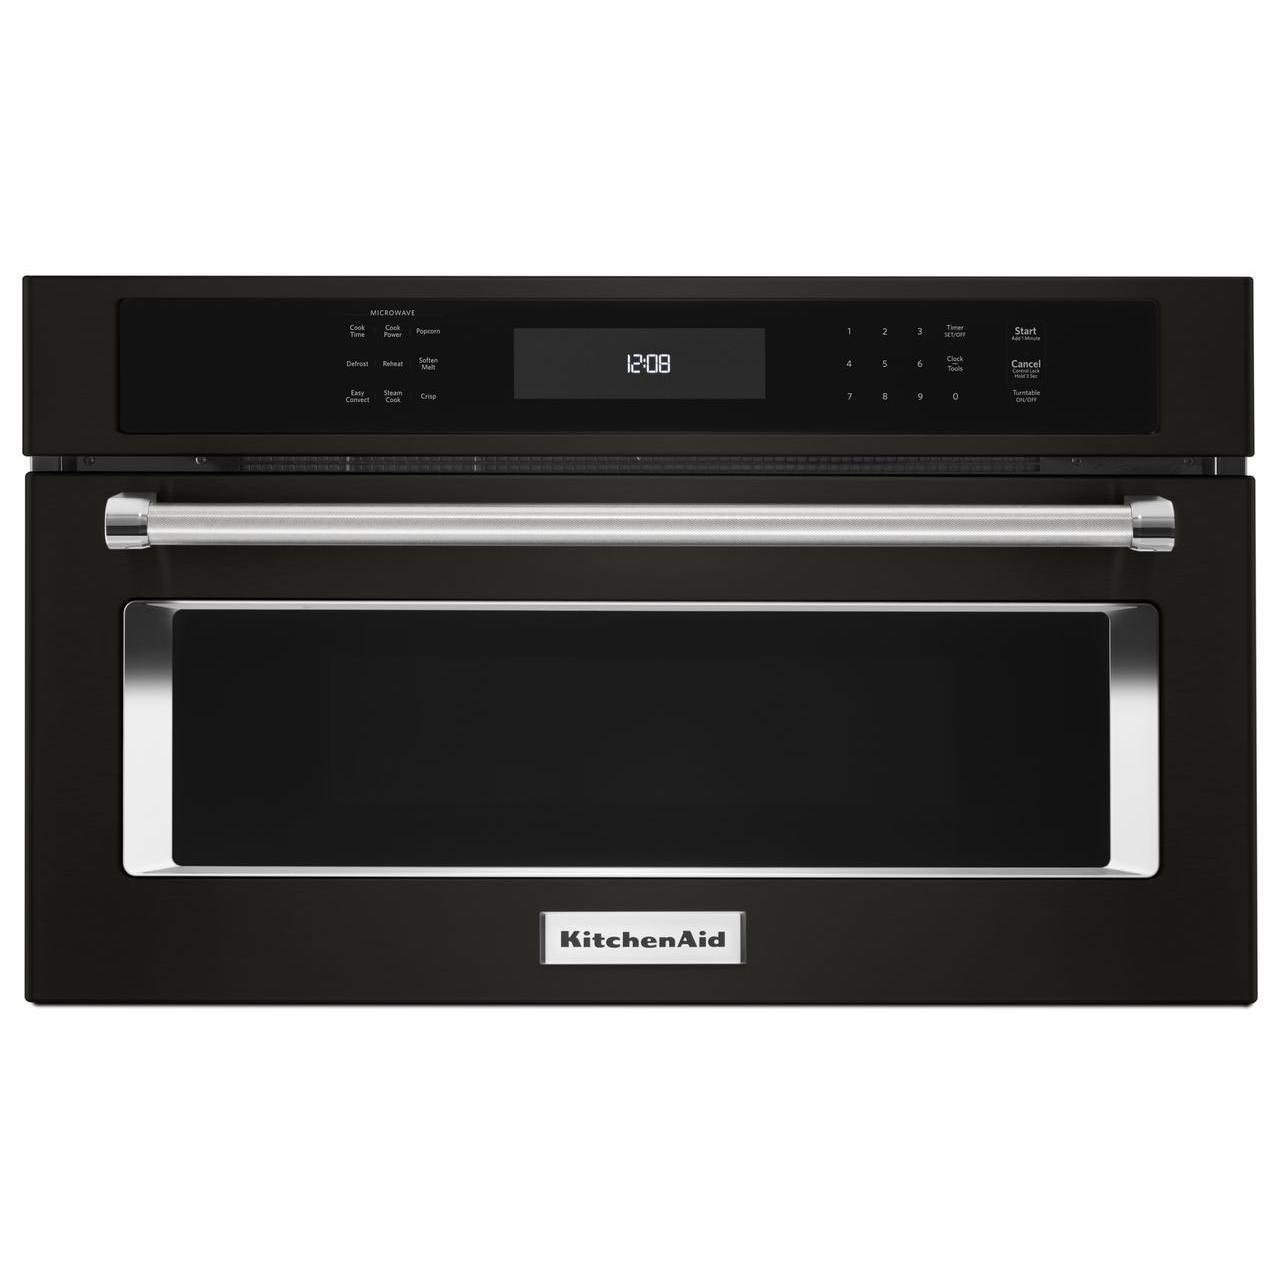 KitchenAid 30-inch, 1.4 cu. ft. Built-in Microwave Oven with Convection KMBP100EBS